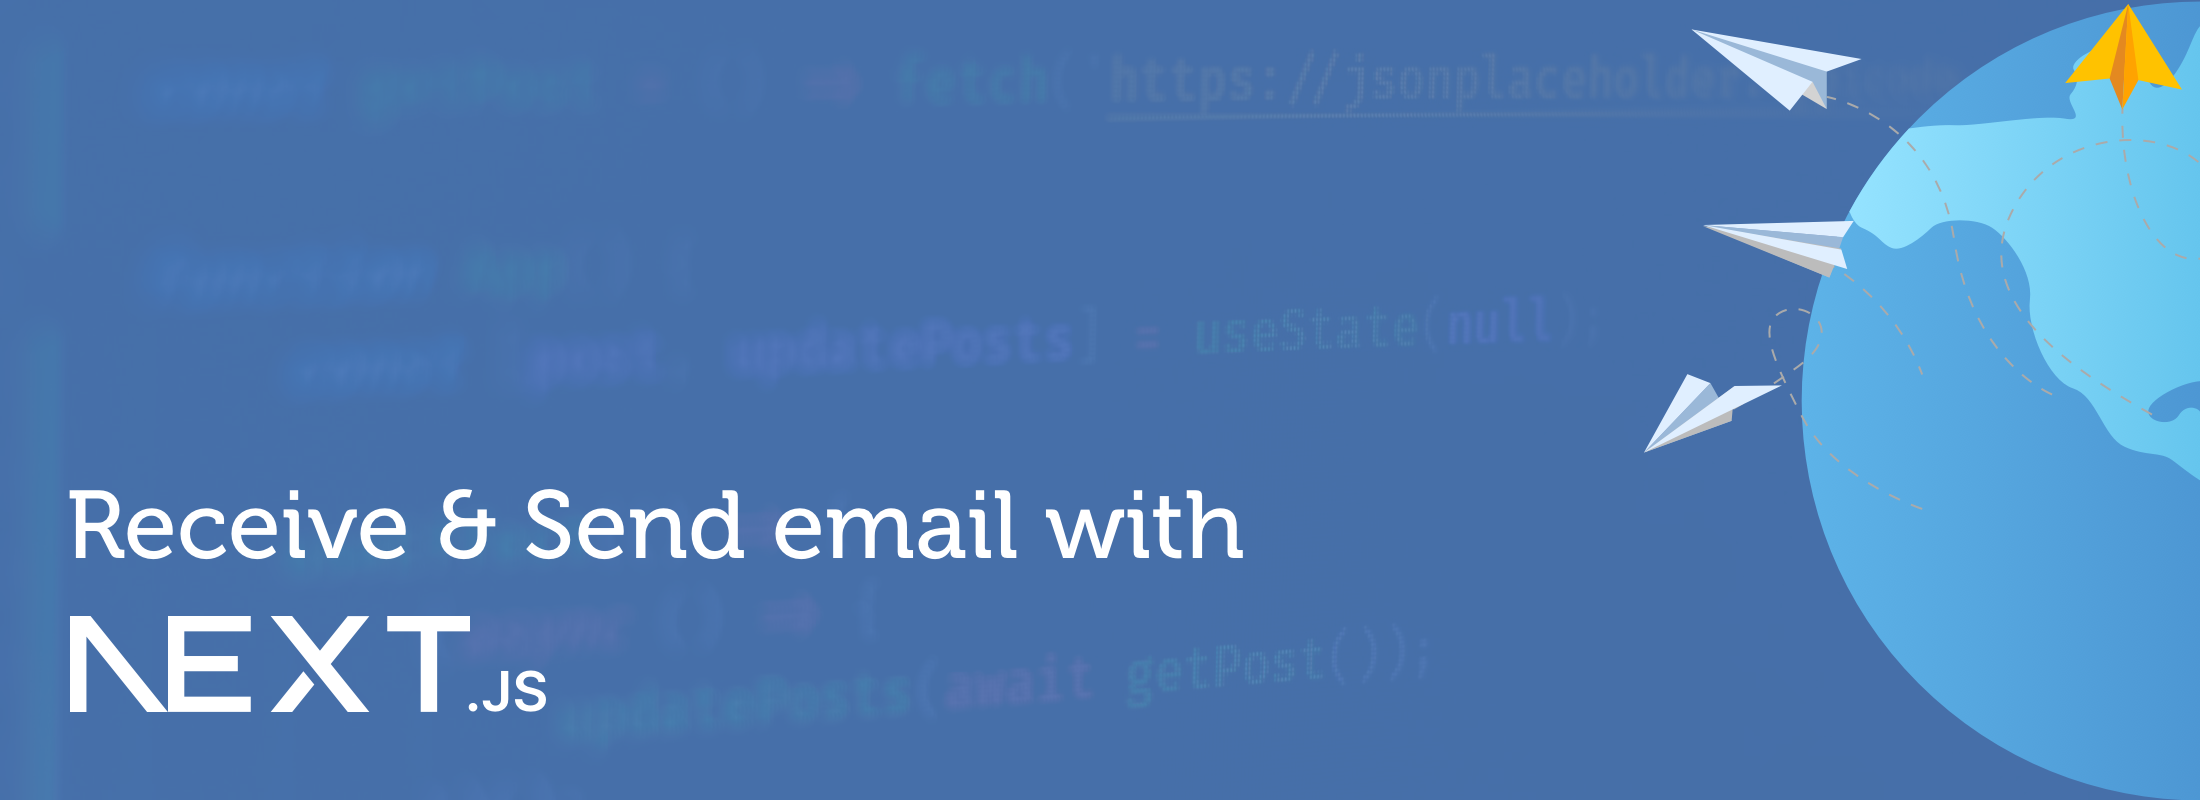 Header Image How to receive email with Next.js, the app router and Typescript